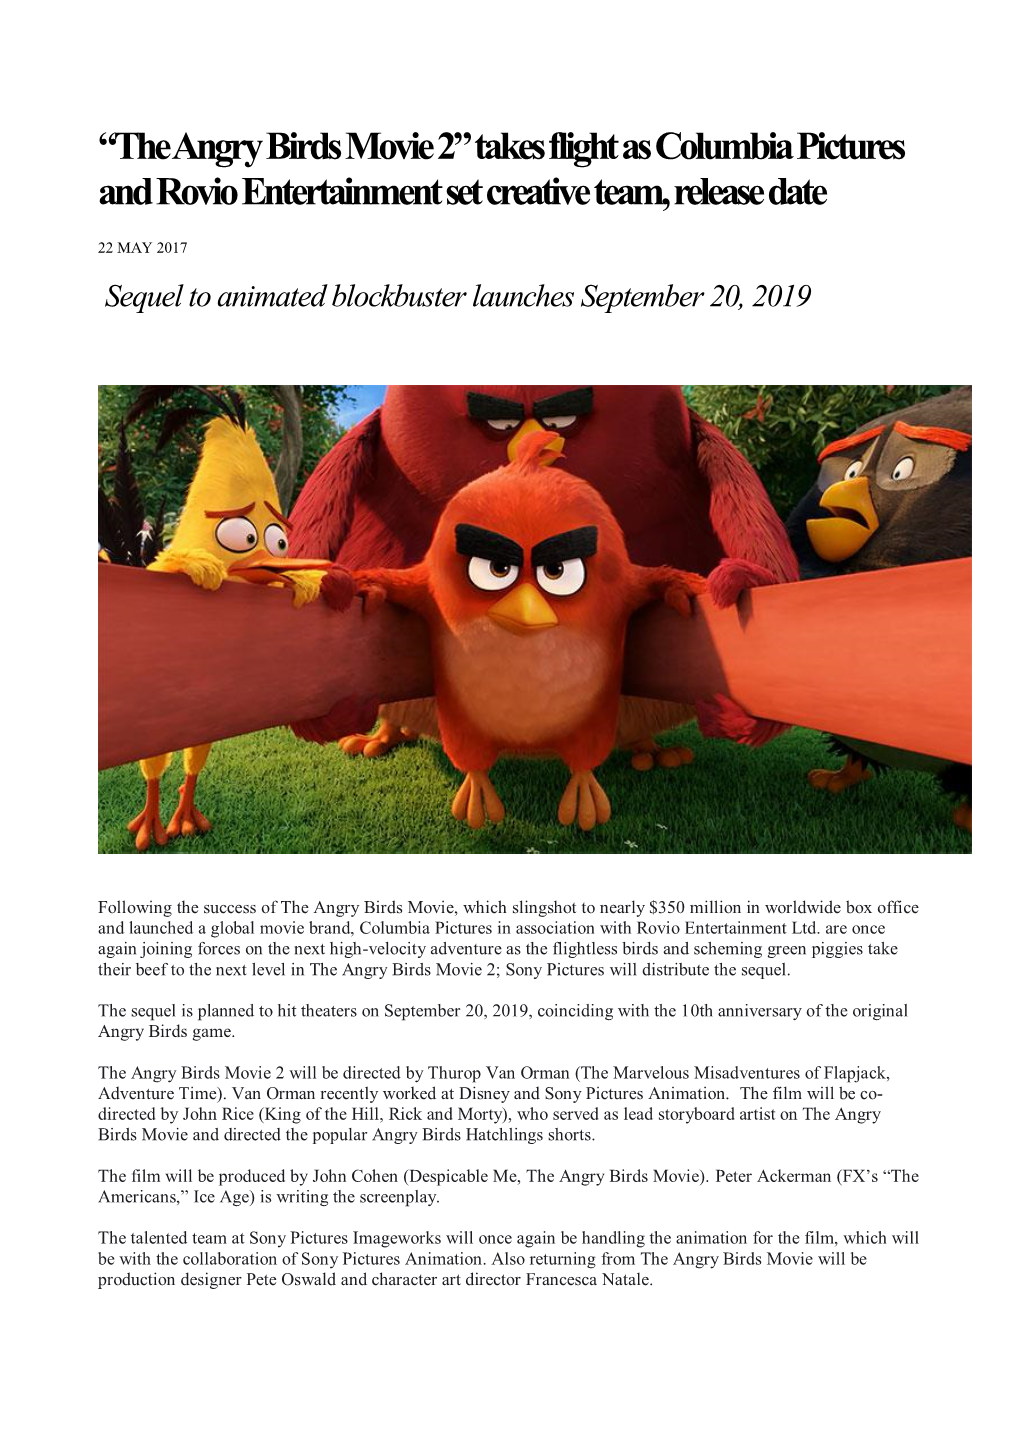 “The Angry Birds Movie 2” Takes Flight As Columbia Pictures and Rovio Entertainment Set Creative Team, Release Date